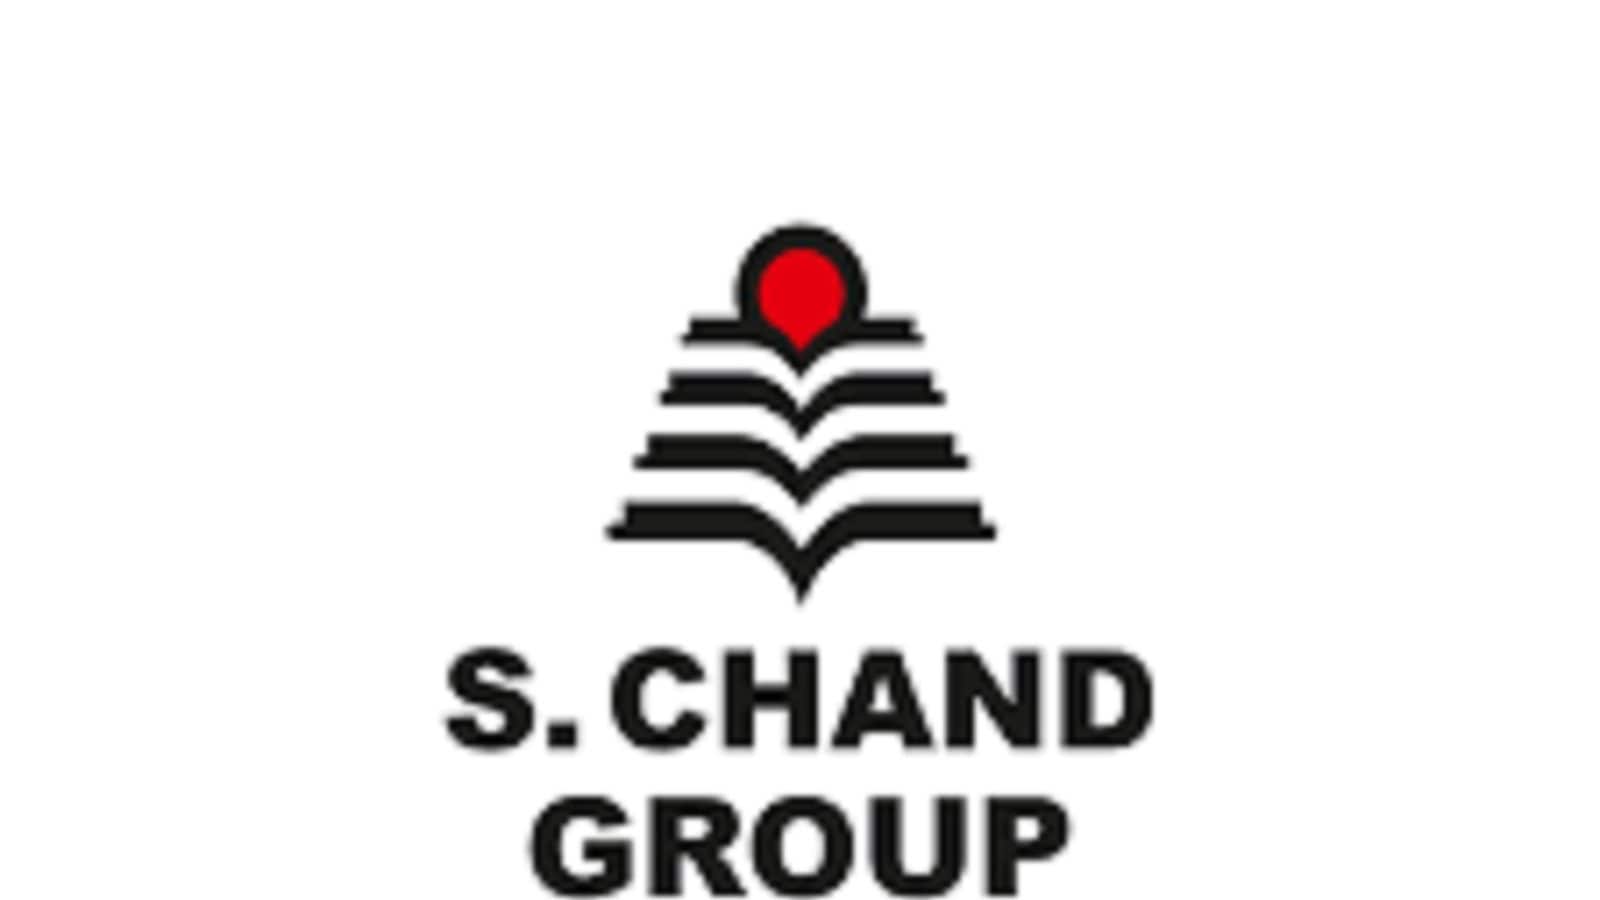 chand graphics Logo Download png